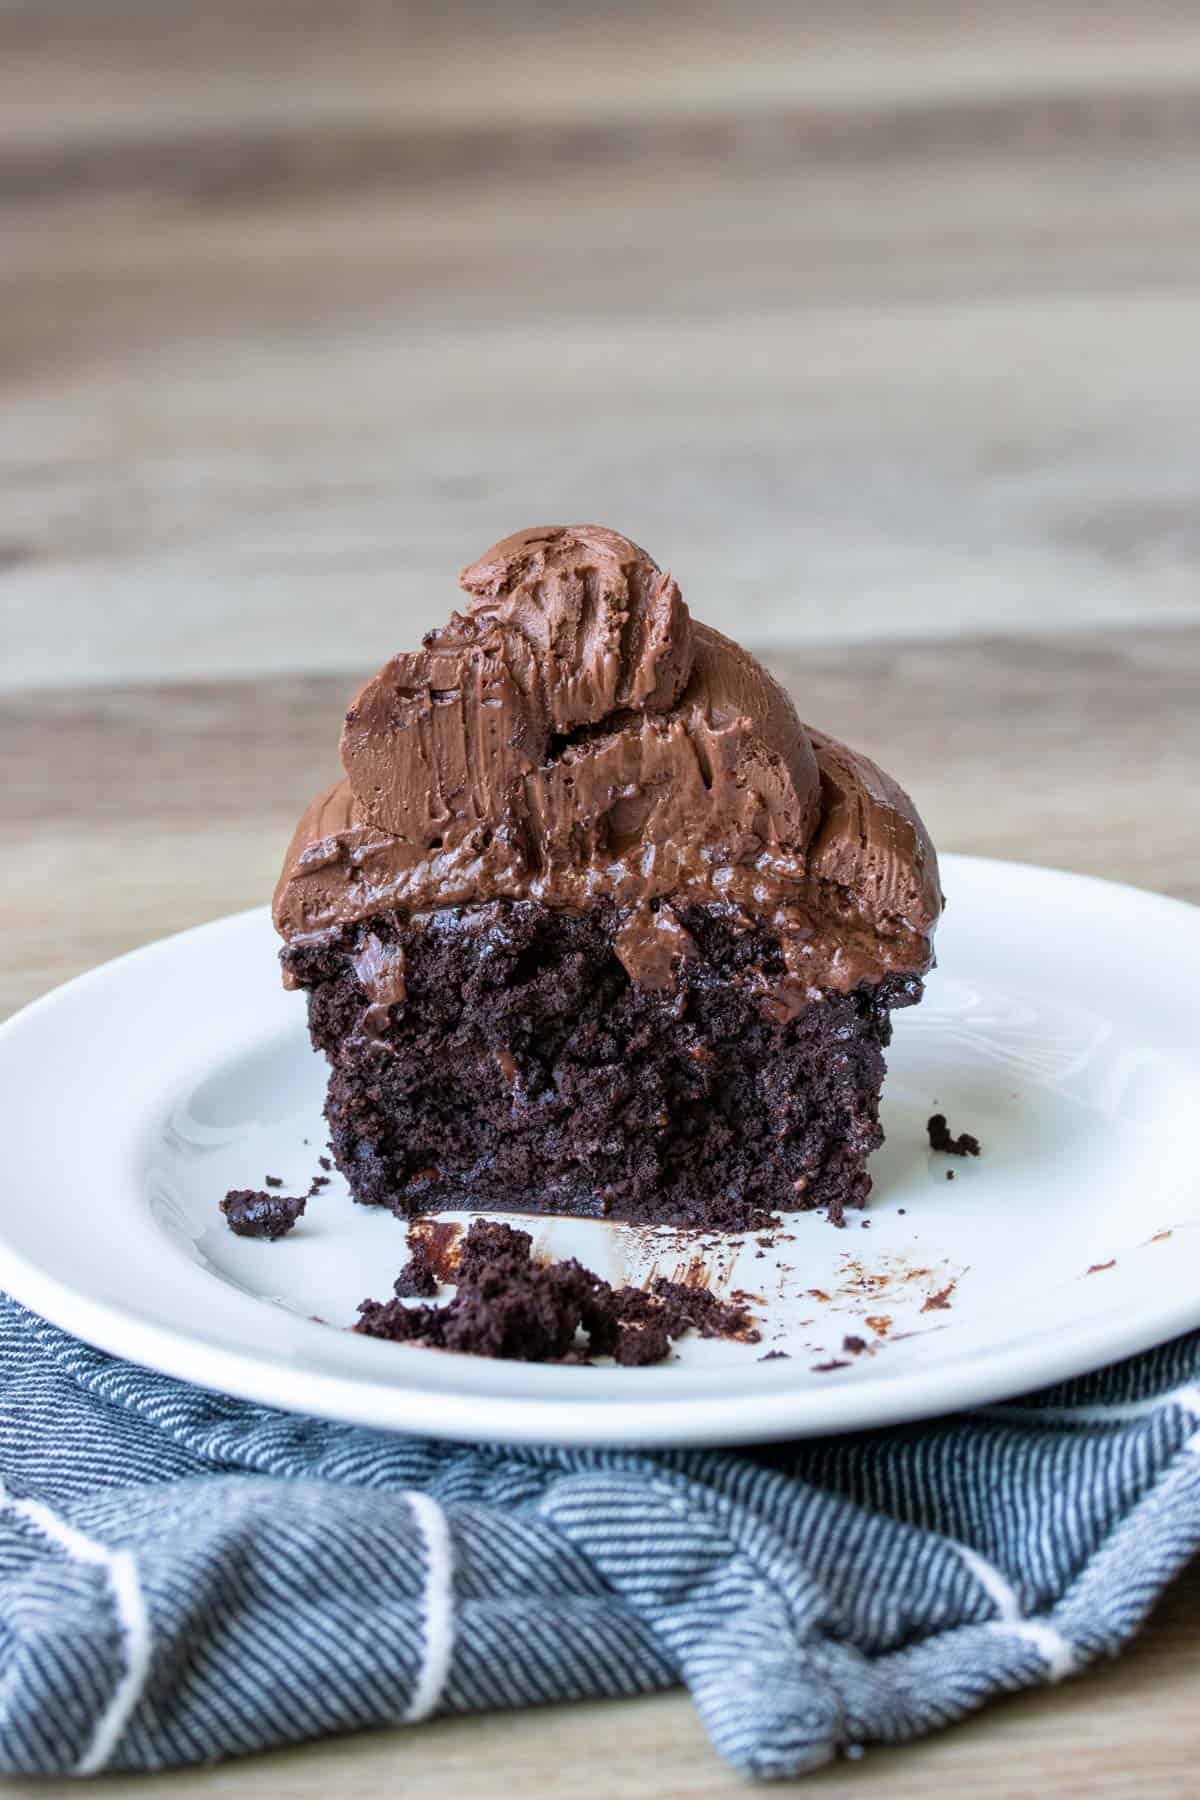 A half eaten chocolate cupcake with chocolate frosting on a white plate